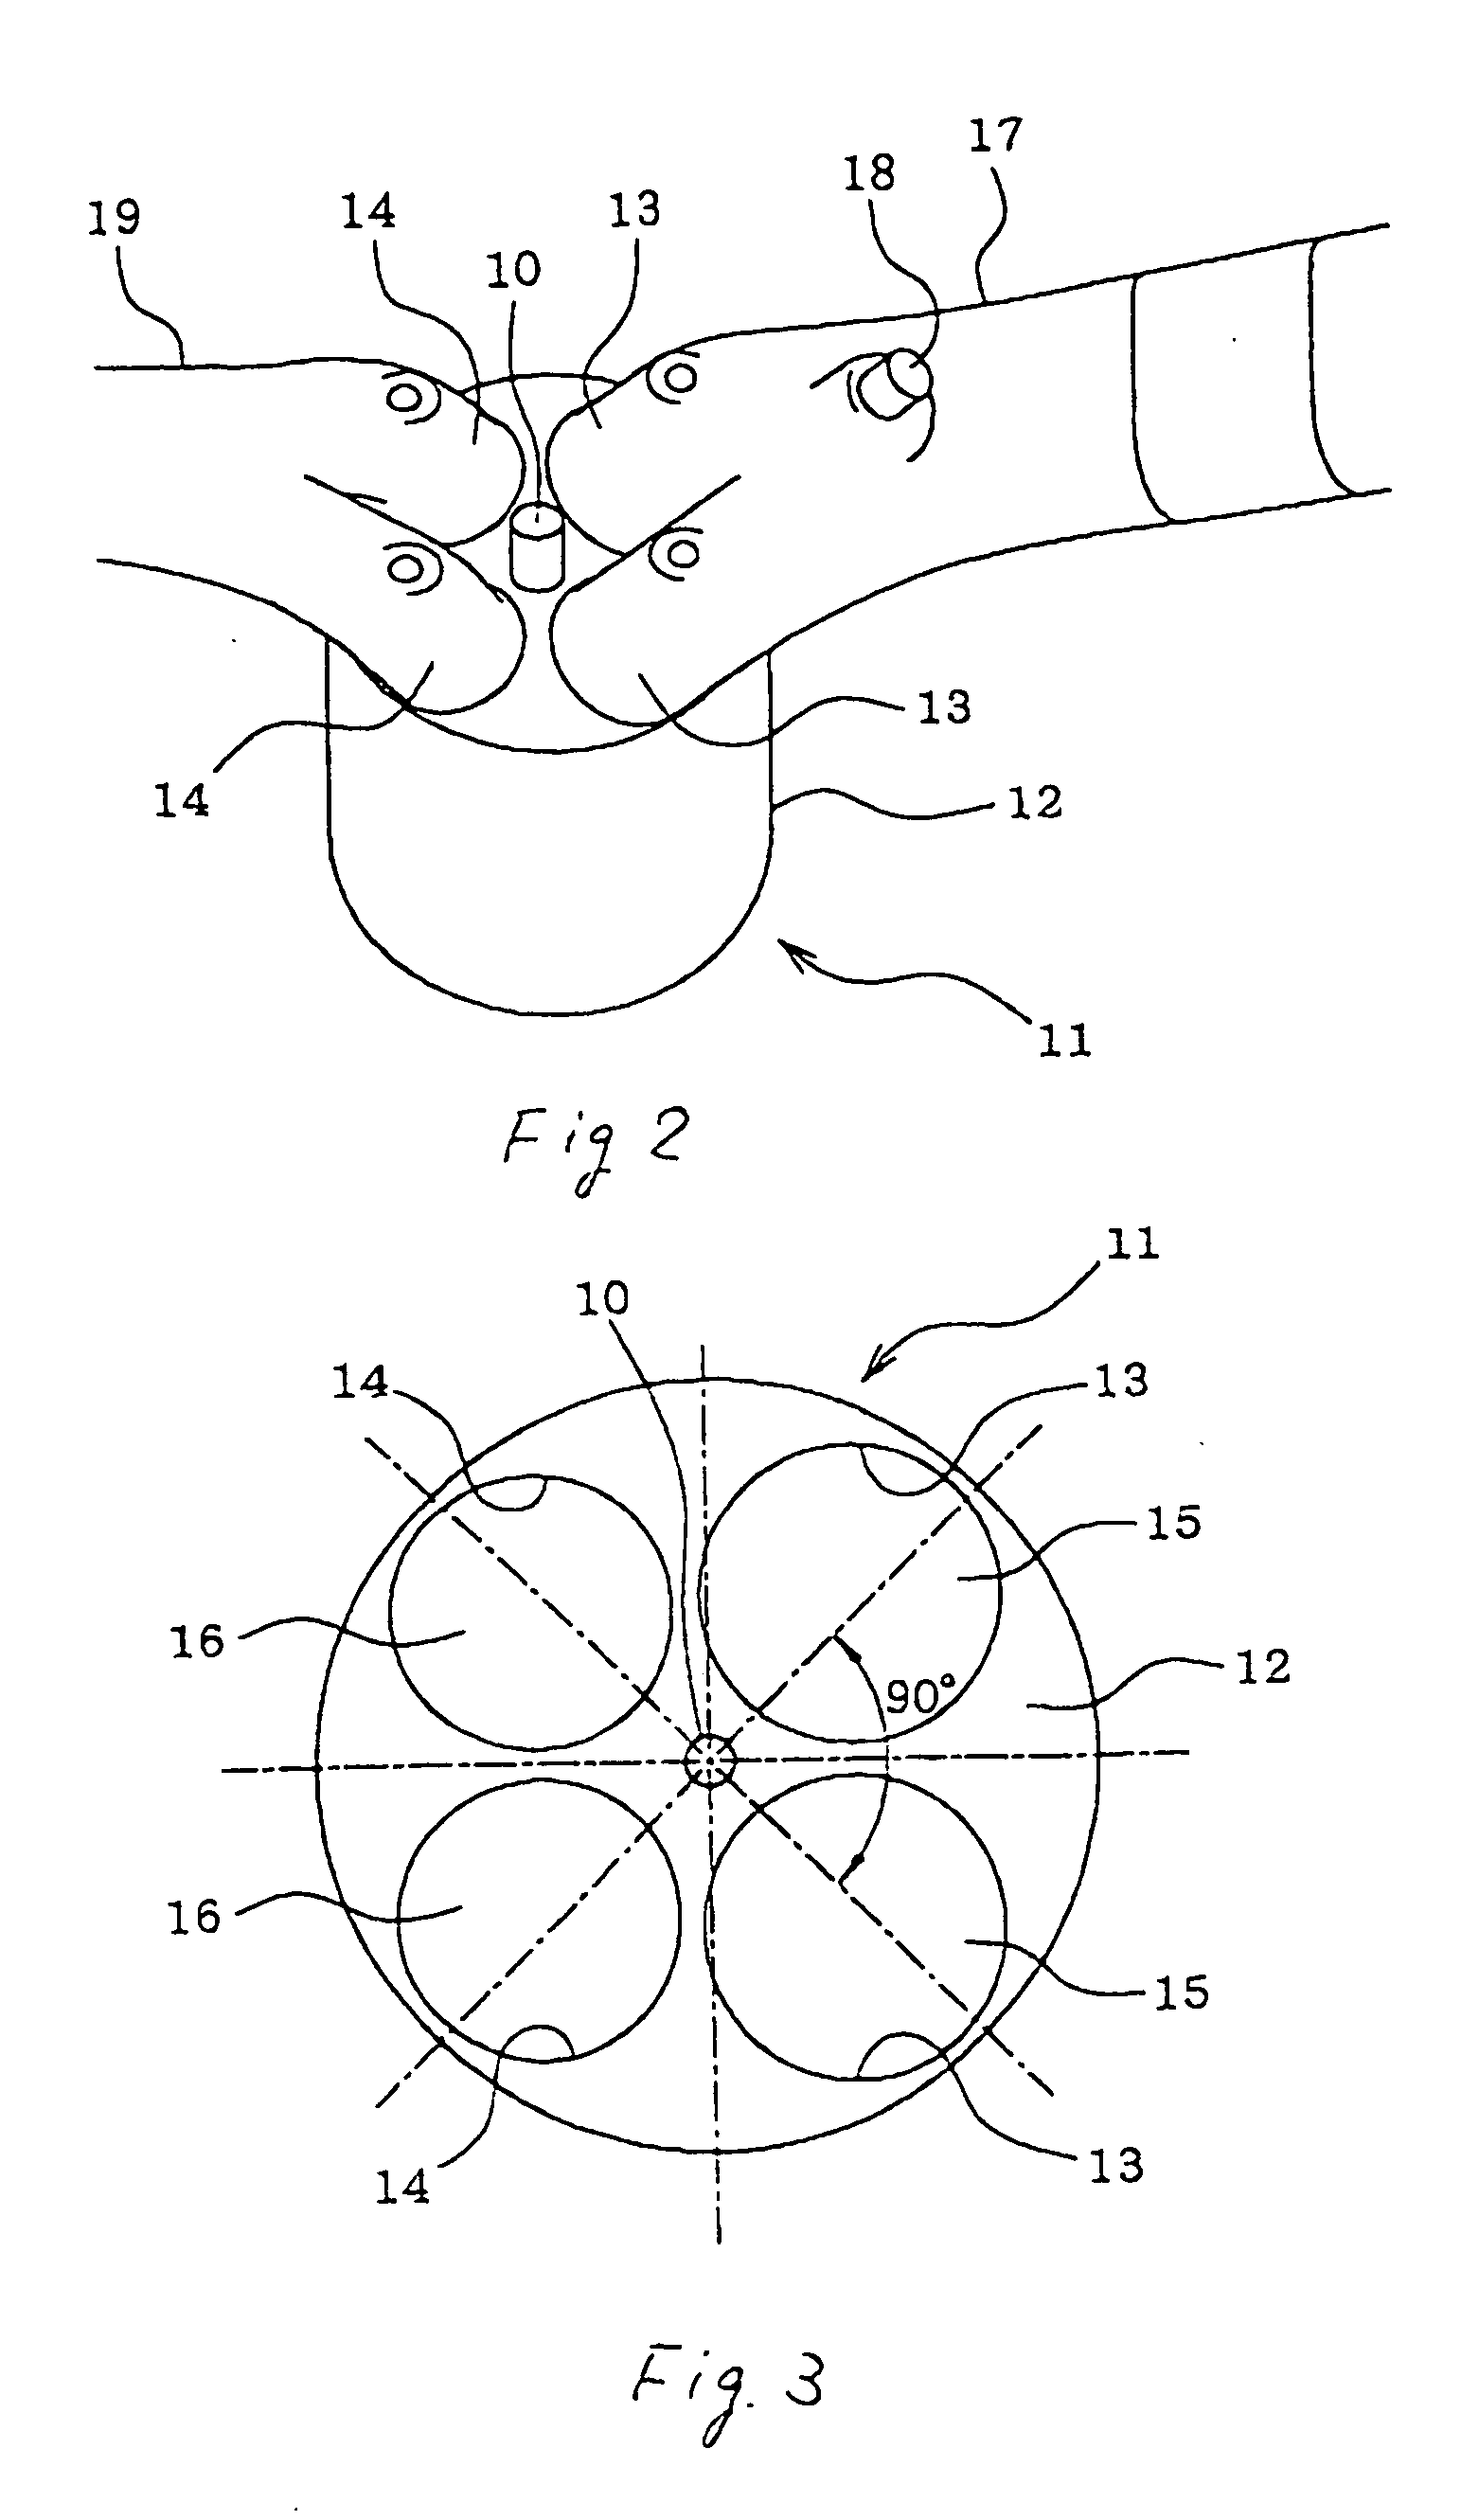 Fuel injector designed to optimize pattern of fuel spray